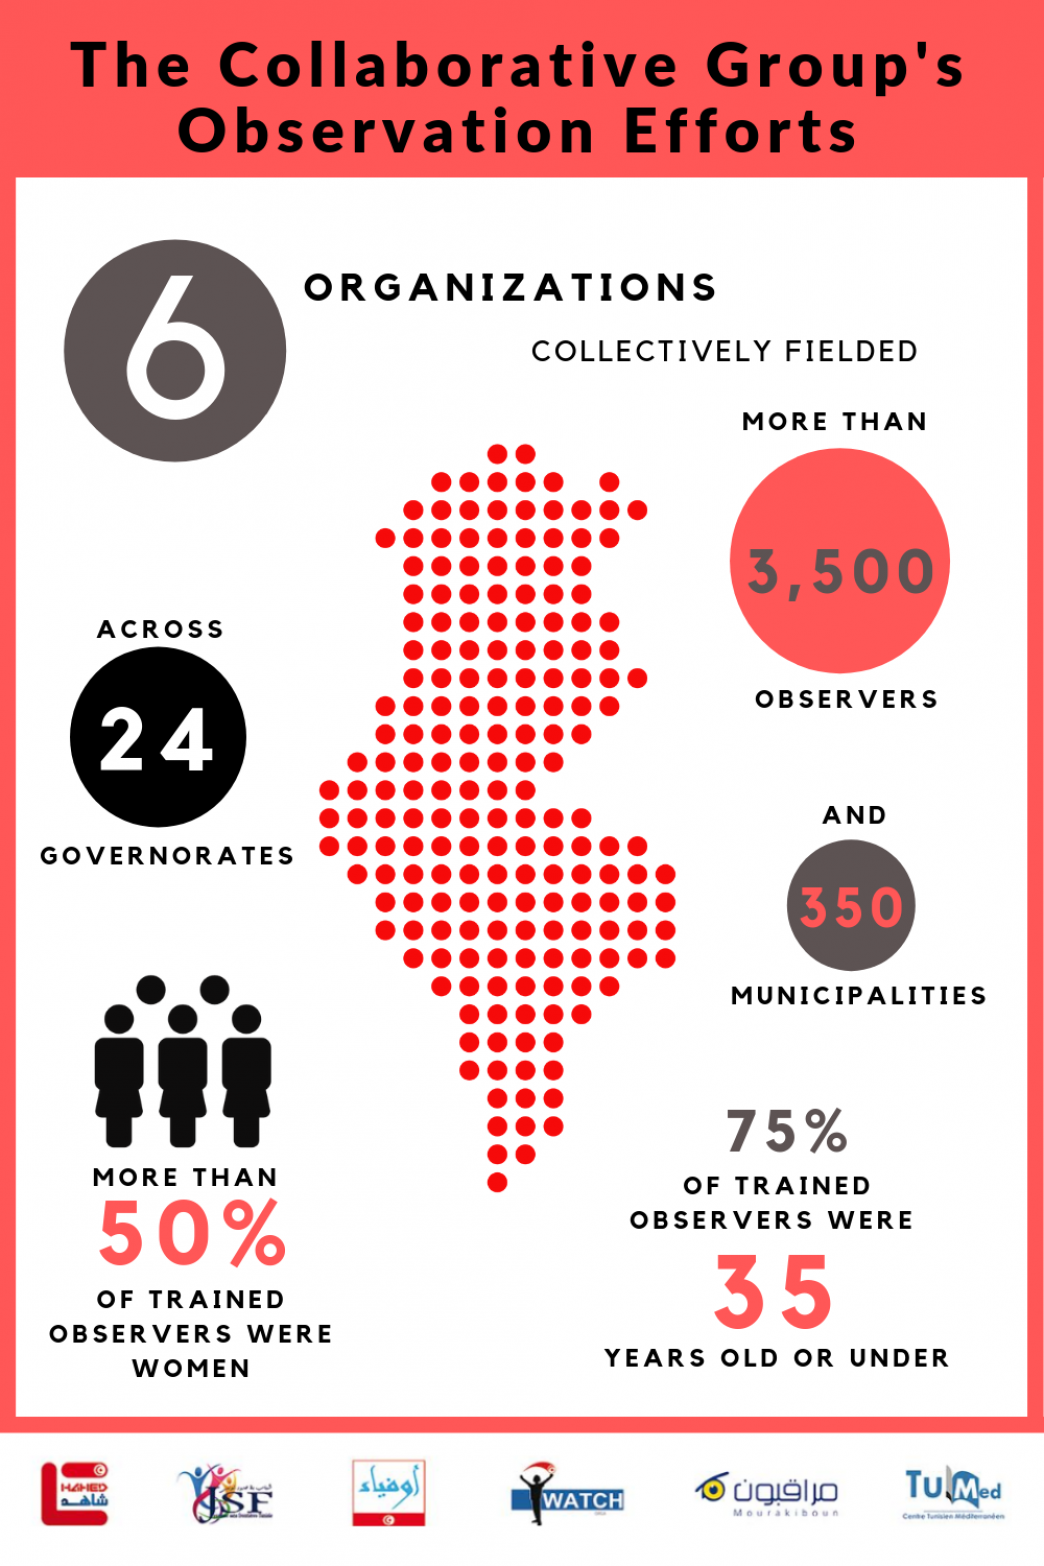 Infographic depicting "The Collaborative Group's Observation Efforts"